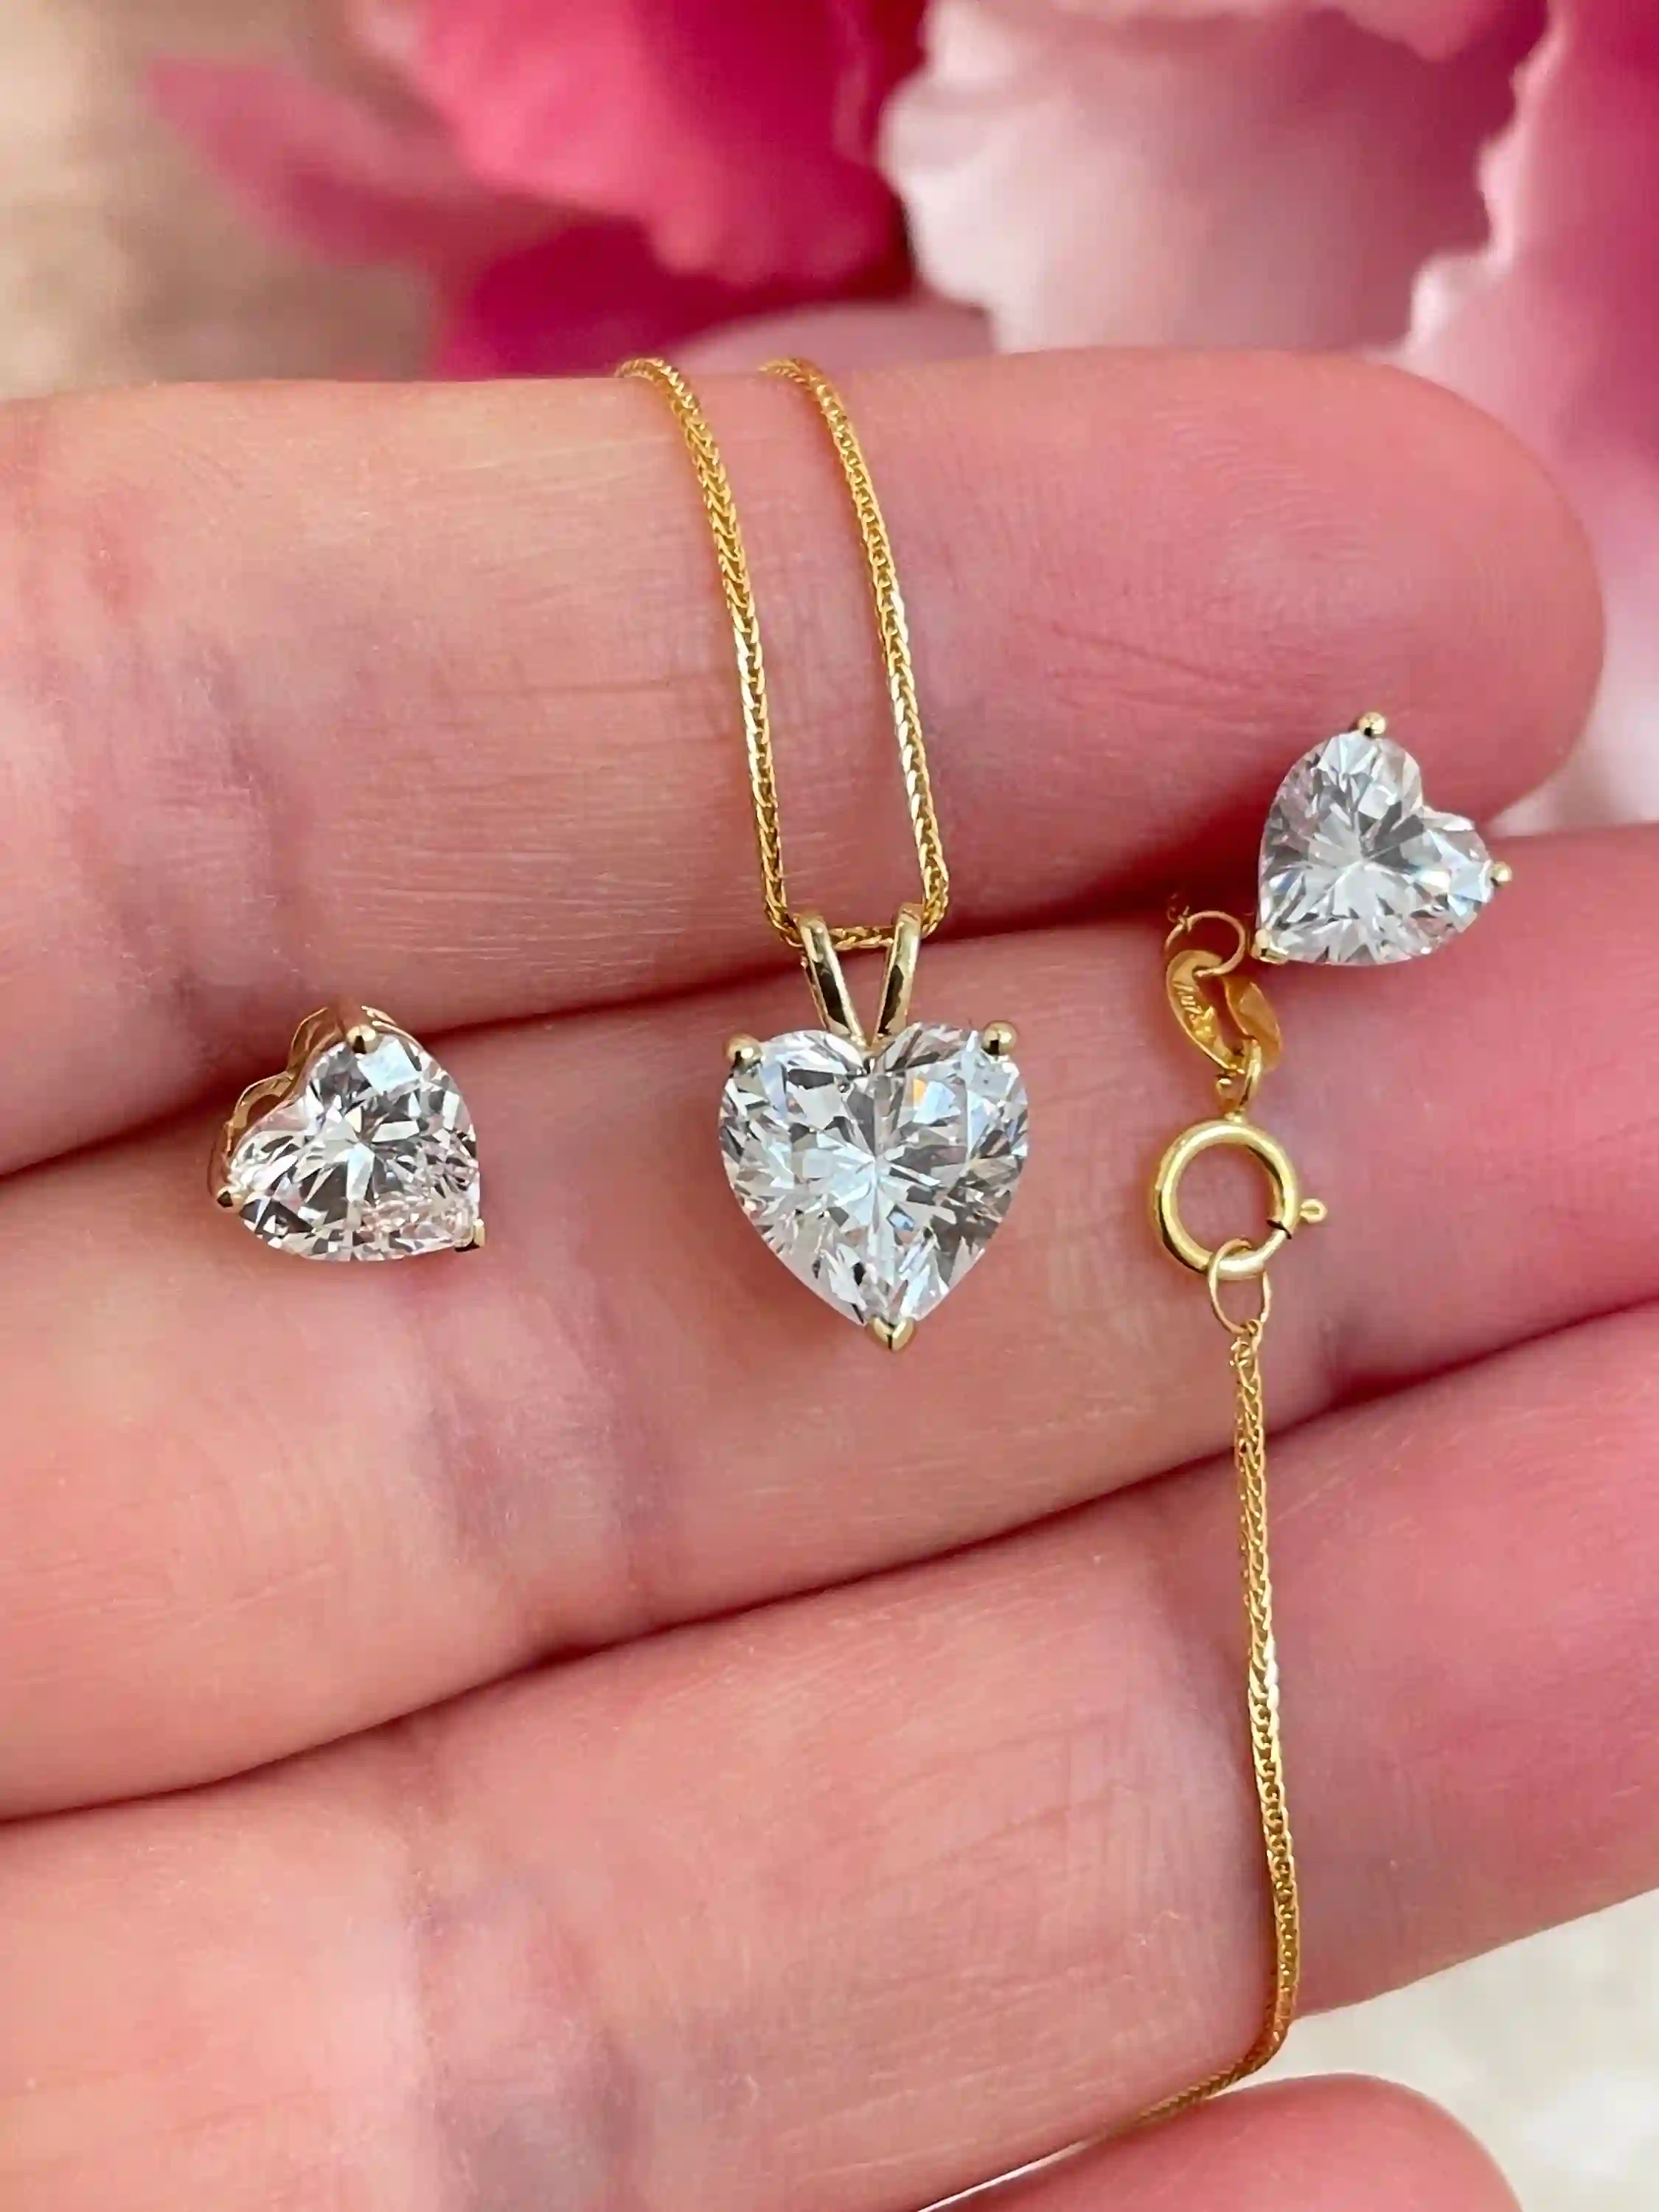 3.5ct Diamond Heart Earrings Diamond Pendant Heart Necklace SOLID 18K GOLD Jewelry HANDMADE Mother's day present gift for her Birthday wife 